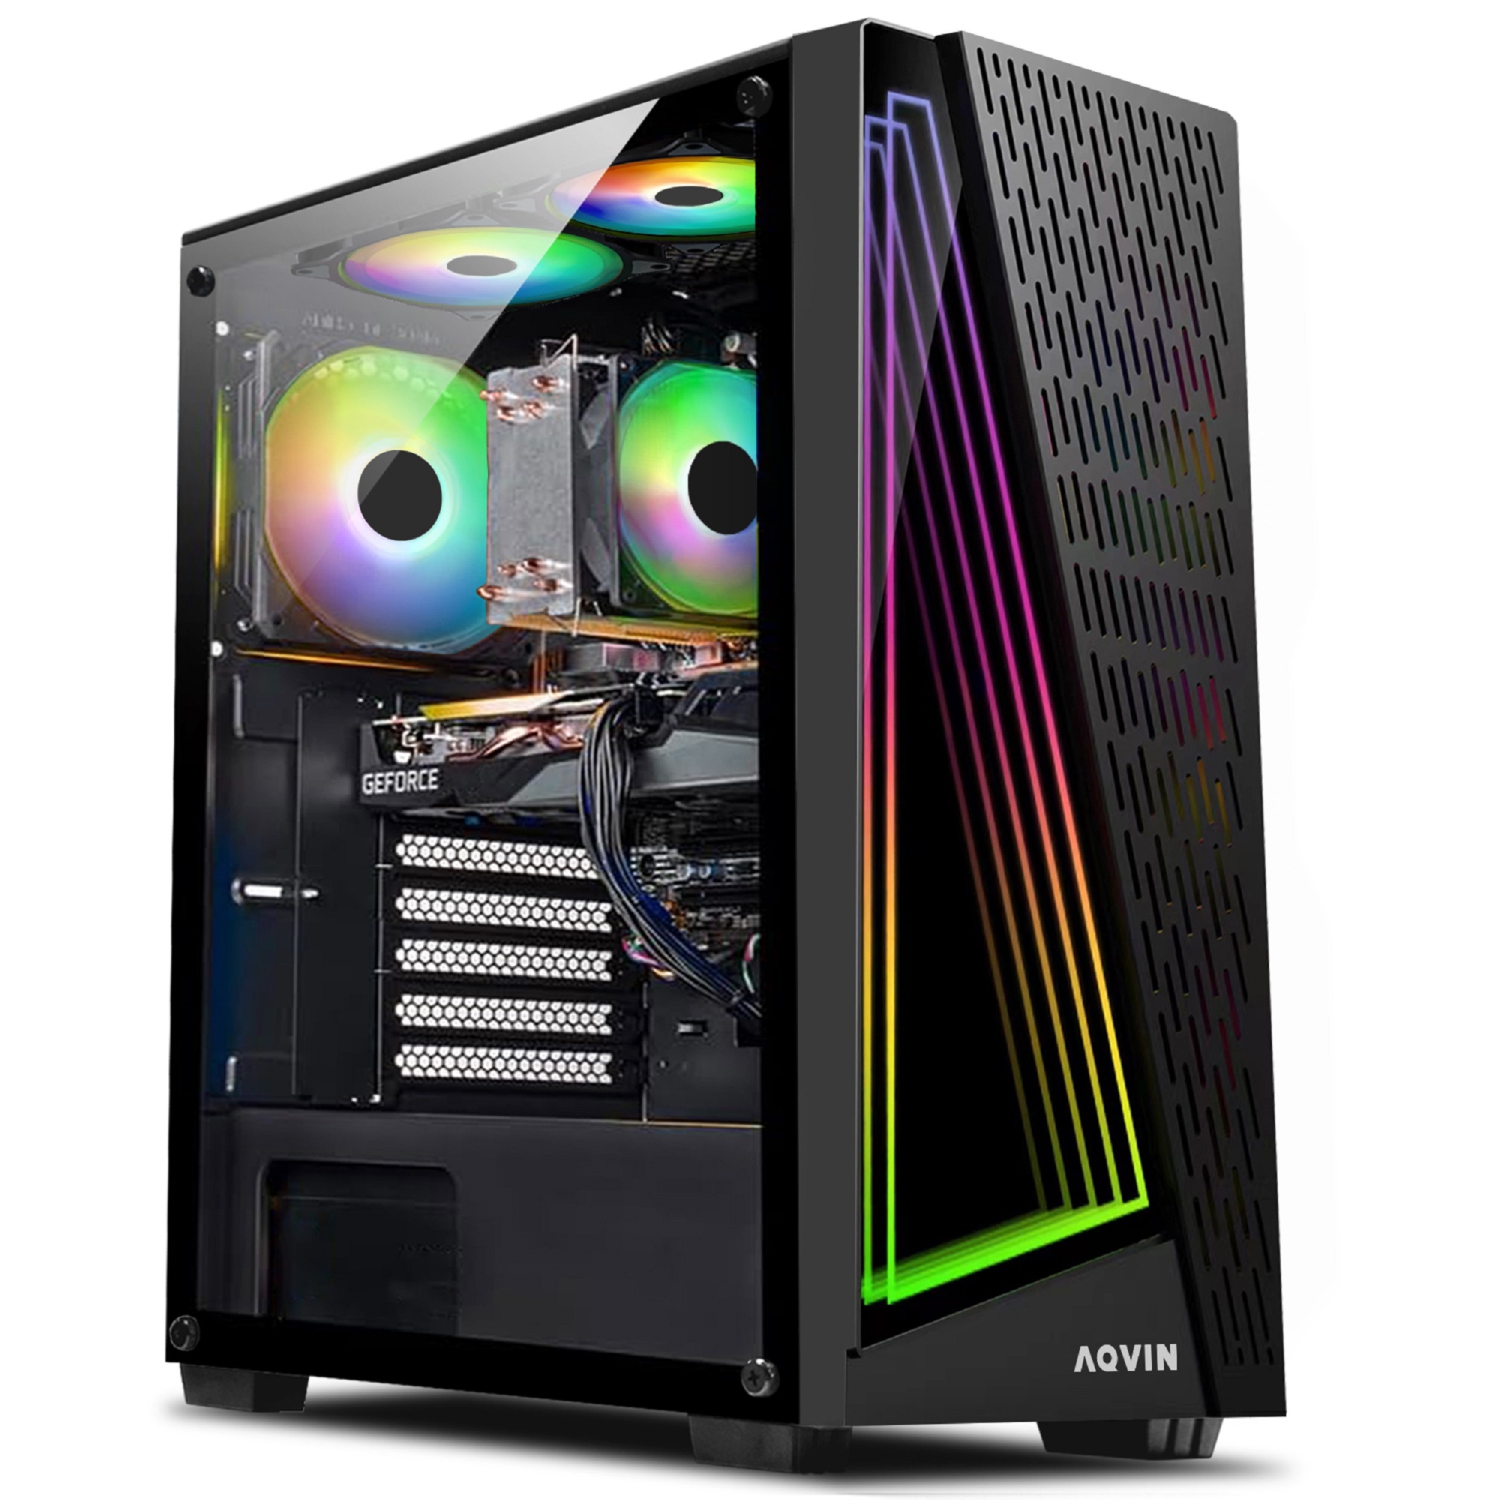 AQVIN AQ50 Gaming Desktop Computer PC Tower - Black (Intel Core i7 processor/ 32GB DDR4 RAM/ 1TB SSD/ GeForce RTX 3050 8GB Graphics Card/ WIN 10 Pro)Gaming Keyboard and Mouse, WIFI